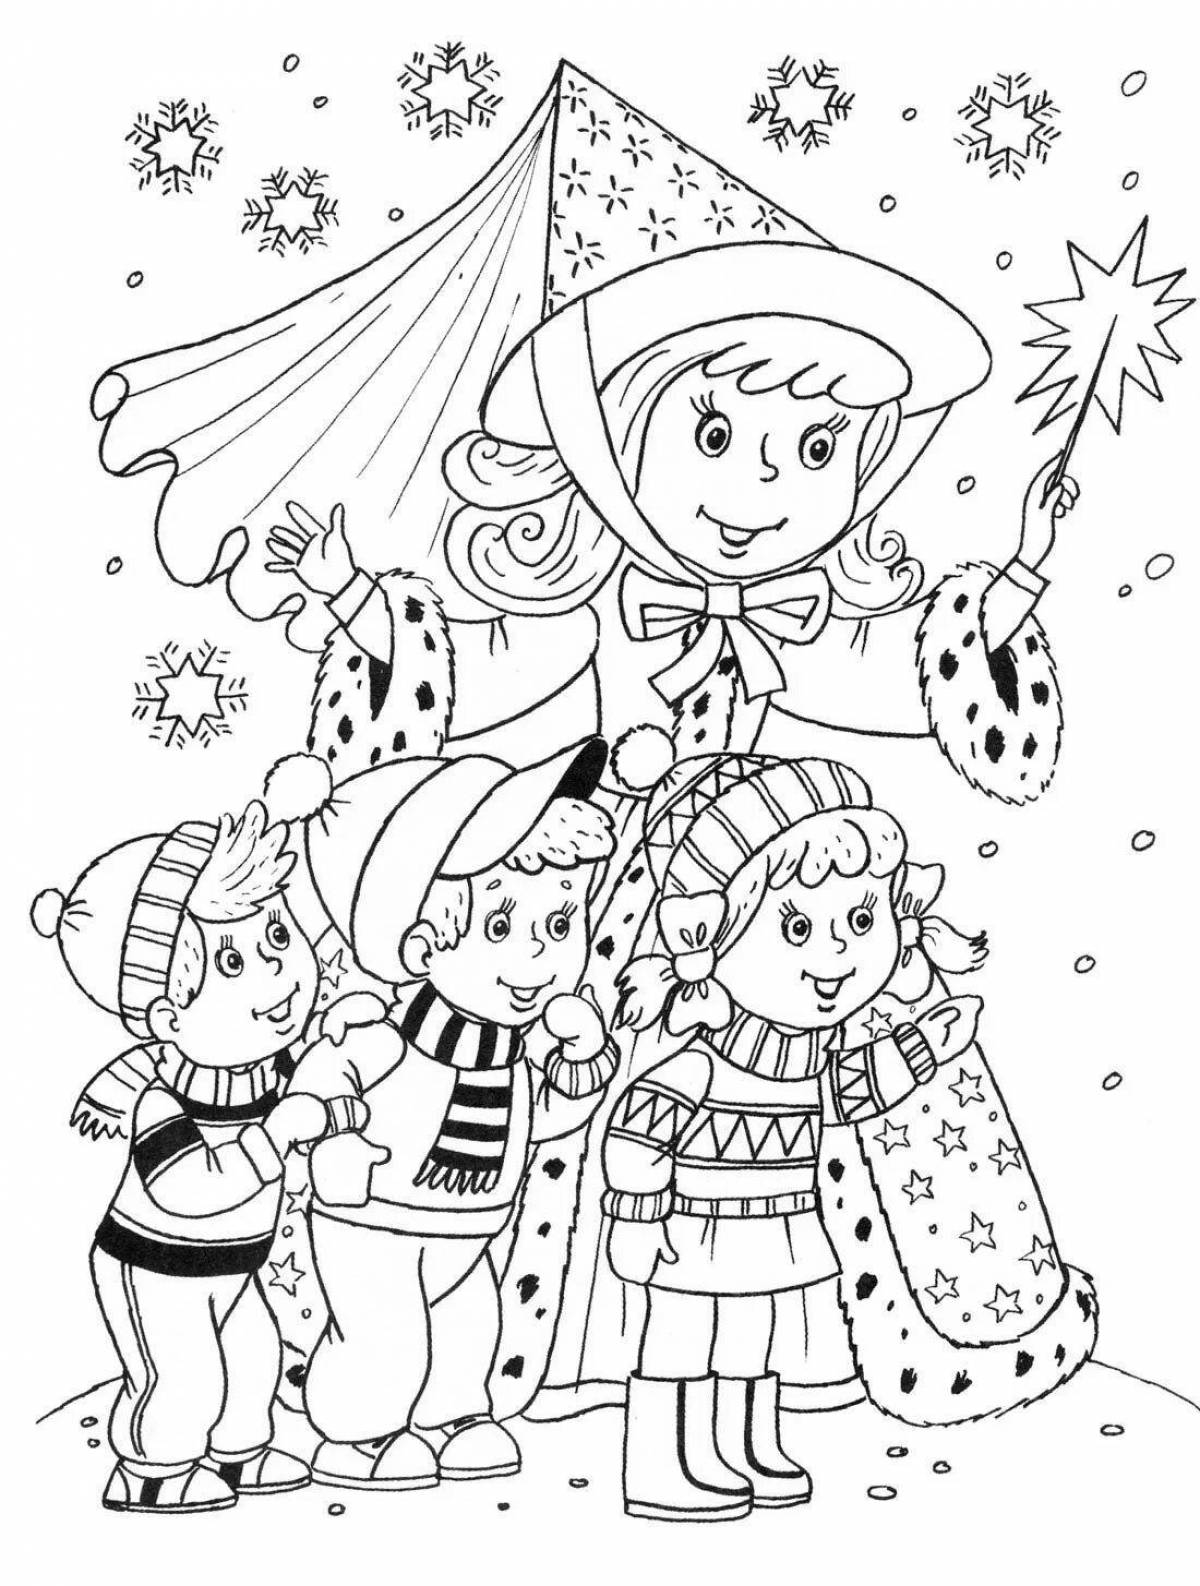 Inspirational Christmas carol coloring pages for kids